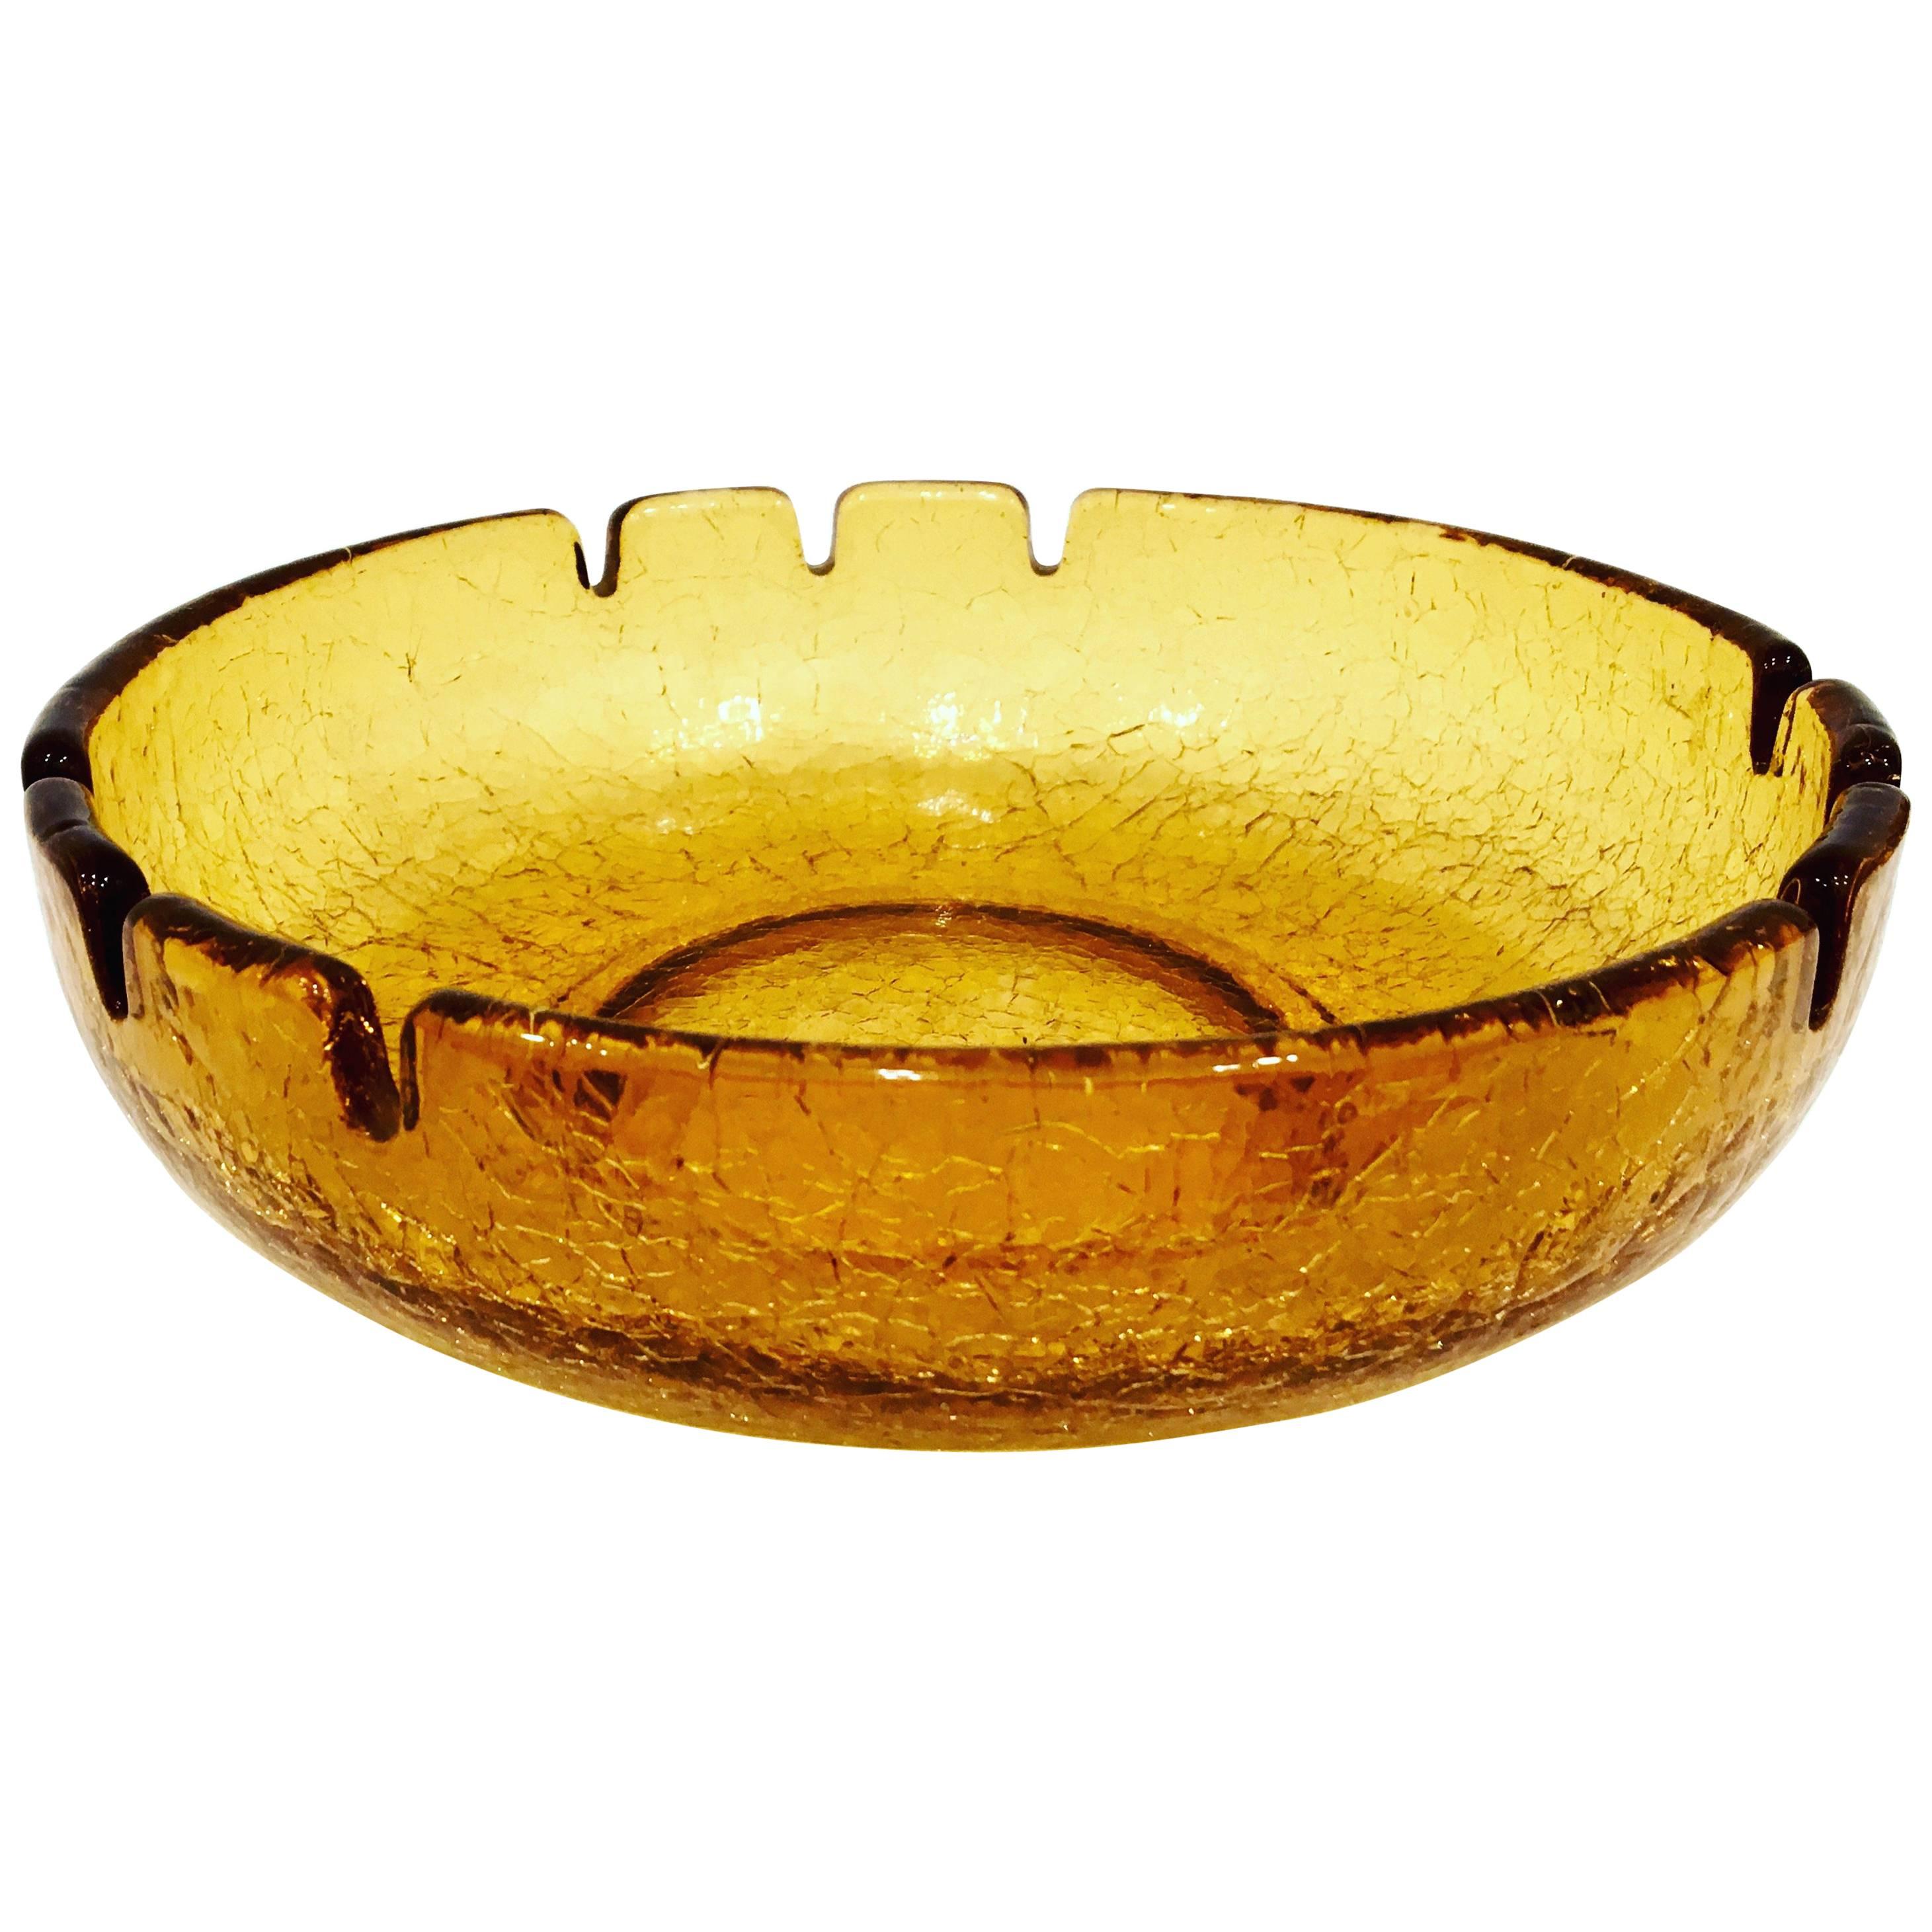 1960s Extra Large Amber Crackle Glass Ashtray by Blenko